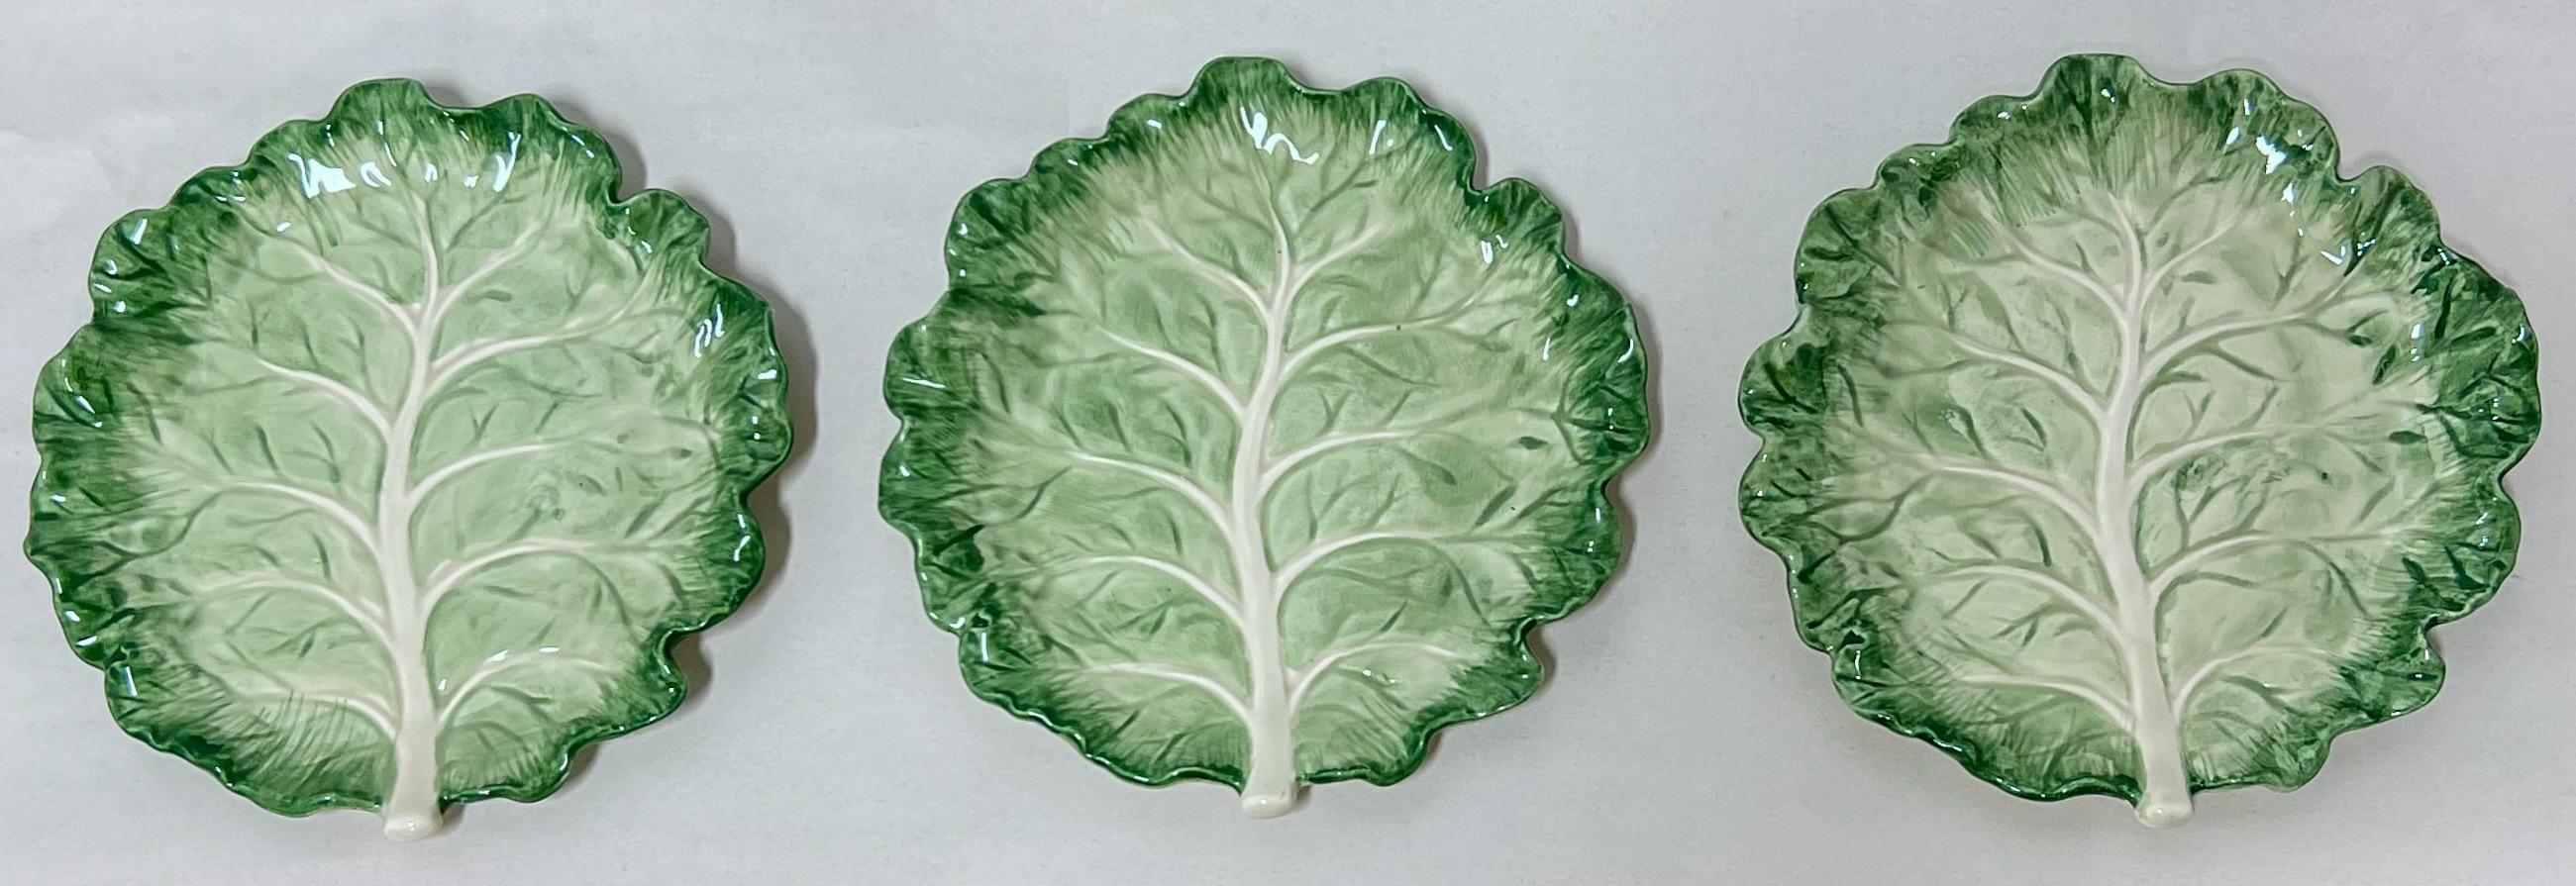 This is just in time for holiday decorating and tablescapes. It is a set of twelve ironstone lettuce or cabbage plates by Fitz& Floyd. They are marked and in very good condition.